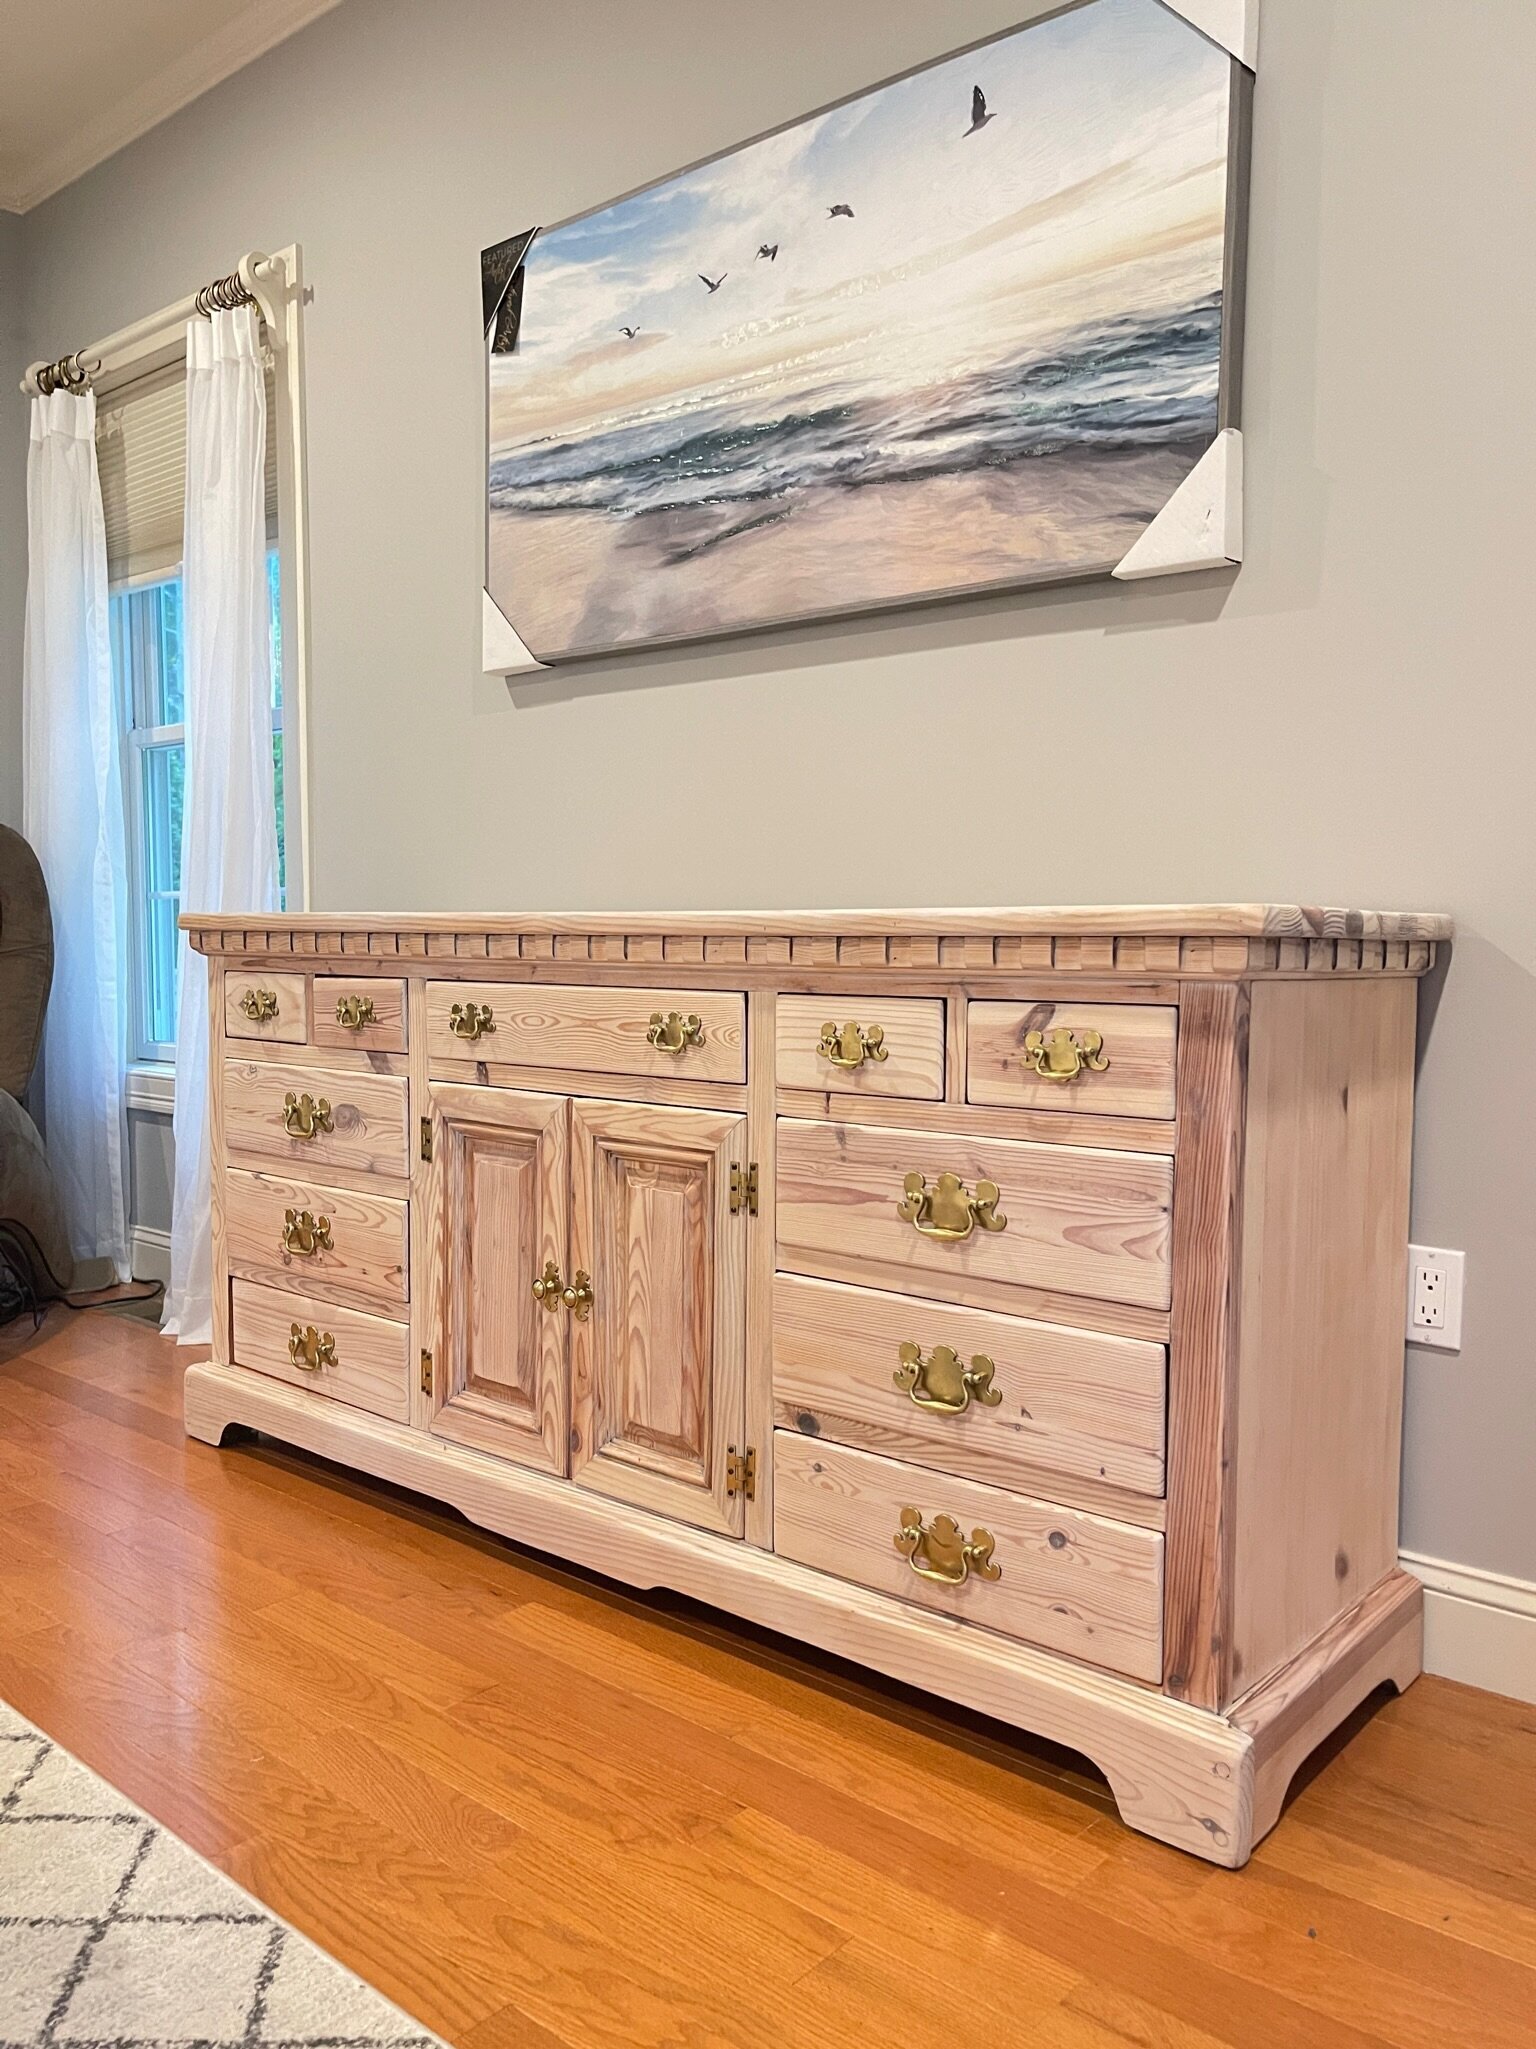 Furniture refinishing service by Down the Hill Woodworkers in Northern Connecticut